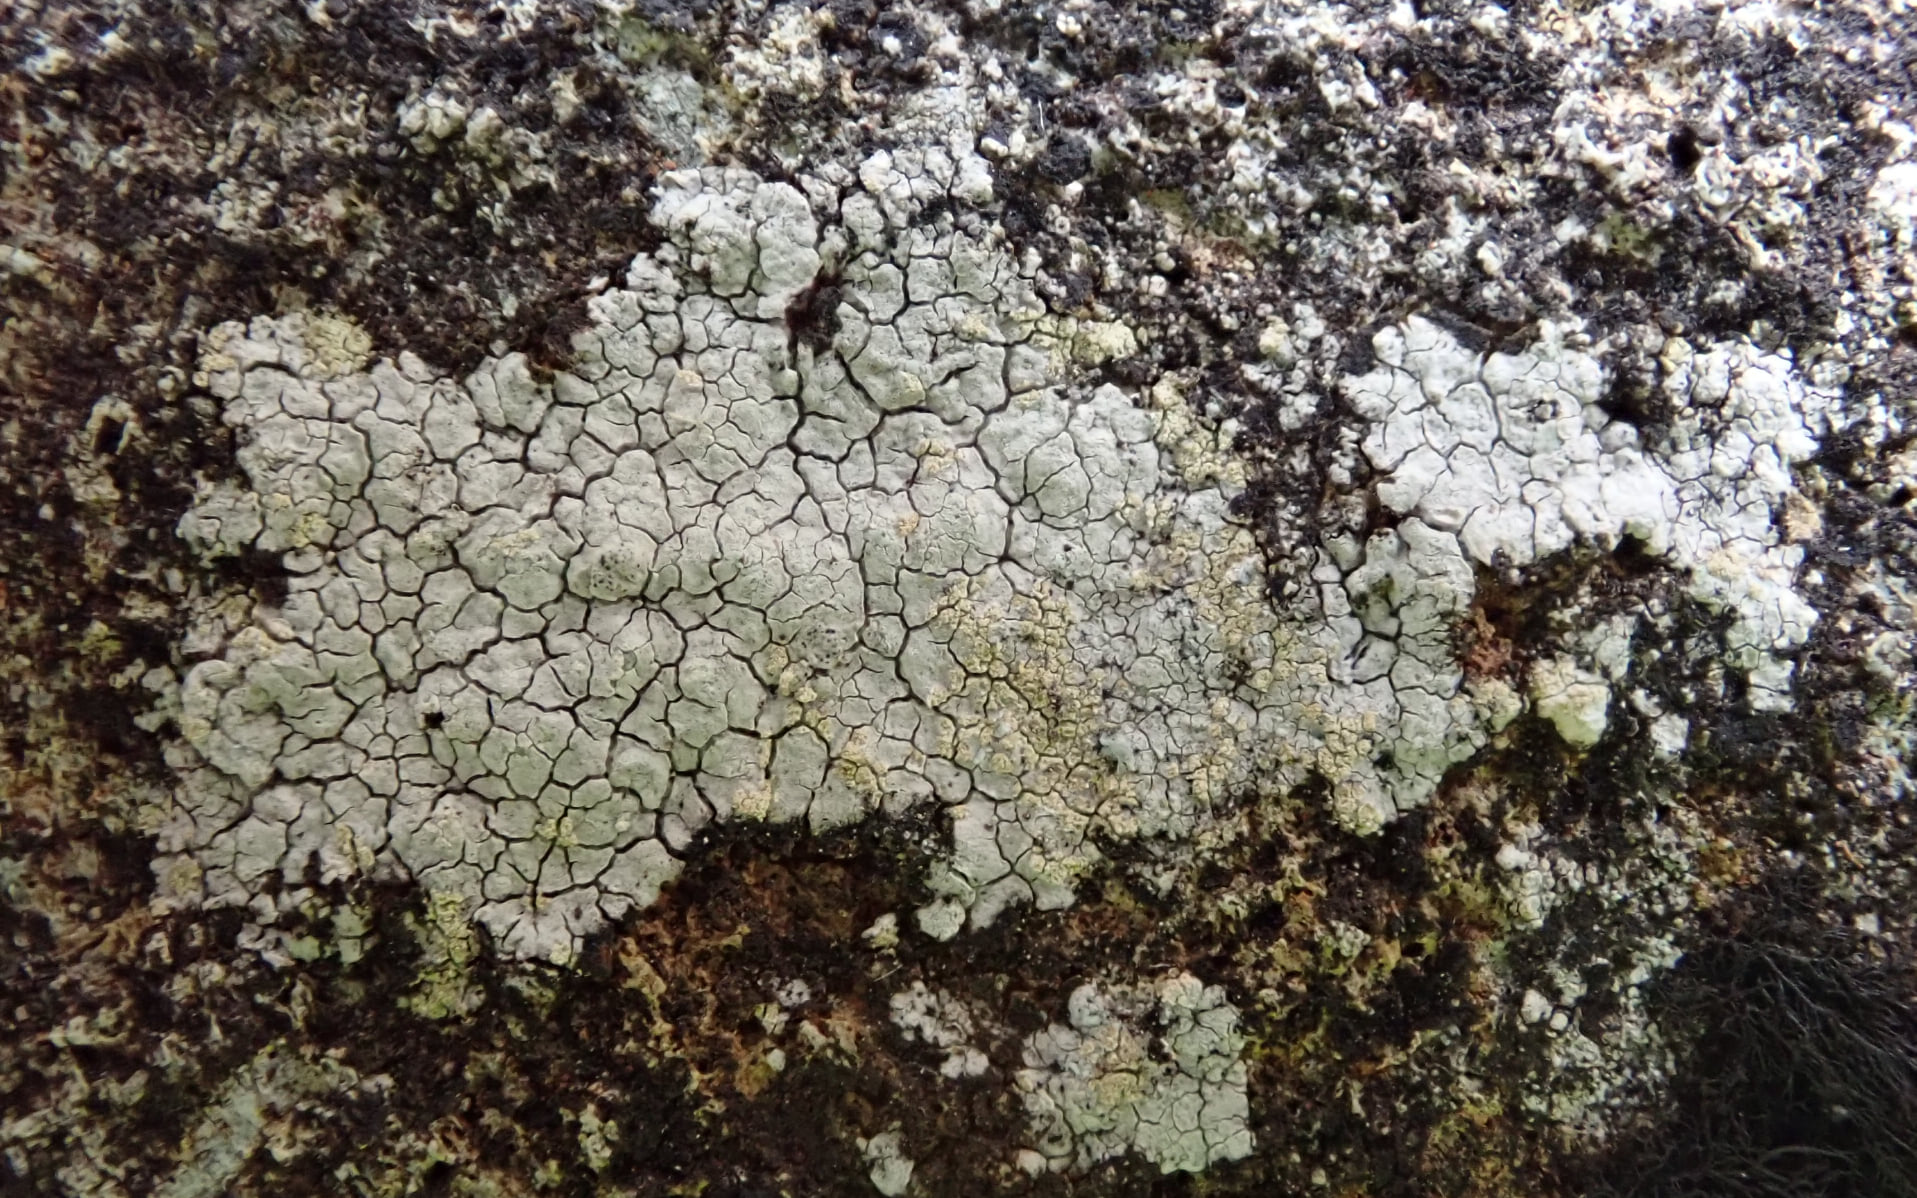 Trapelia placodioides, looking almost lobate at the edges, with creamy soredia growing near the edges and around cracks in the thallus